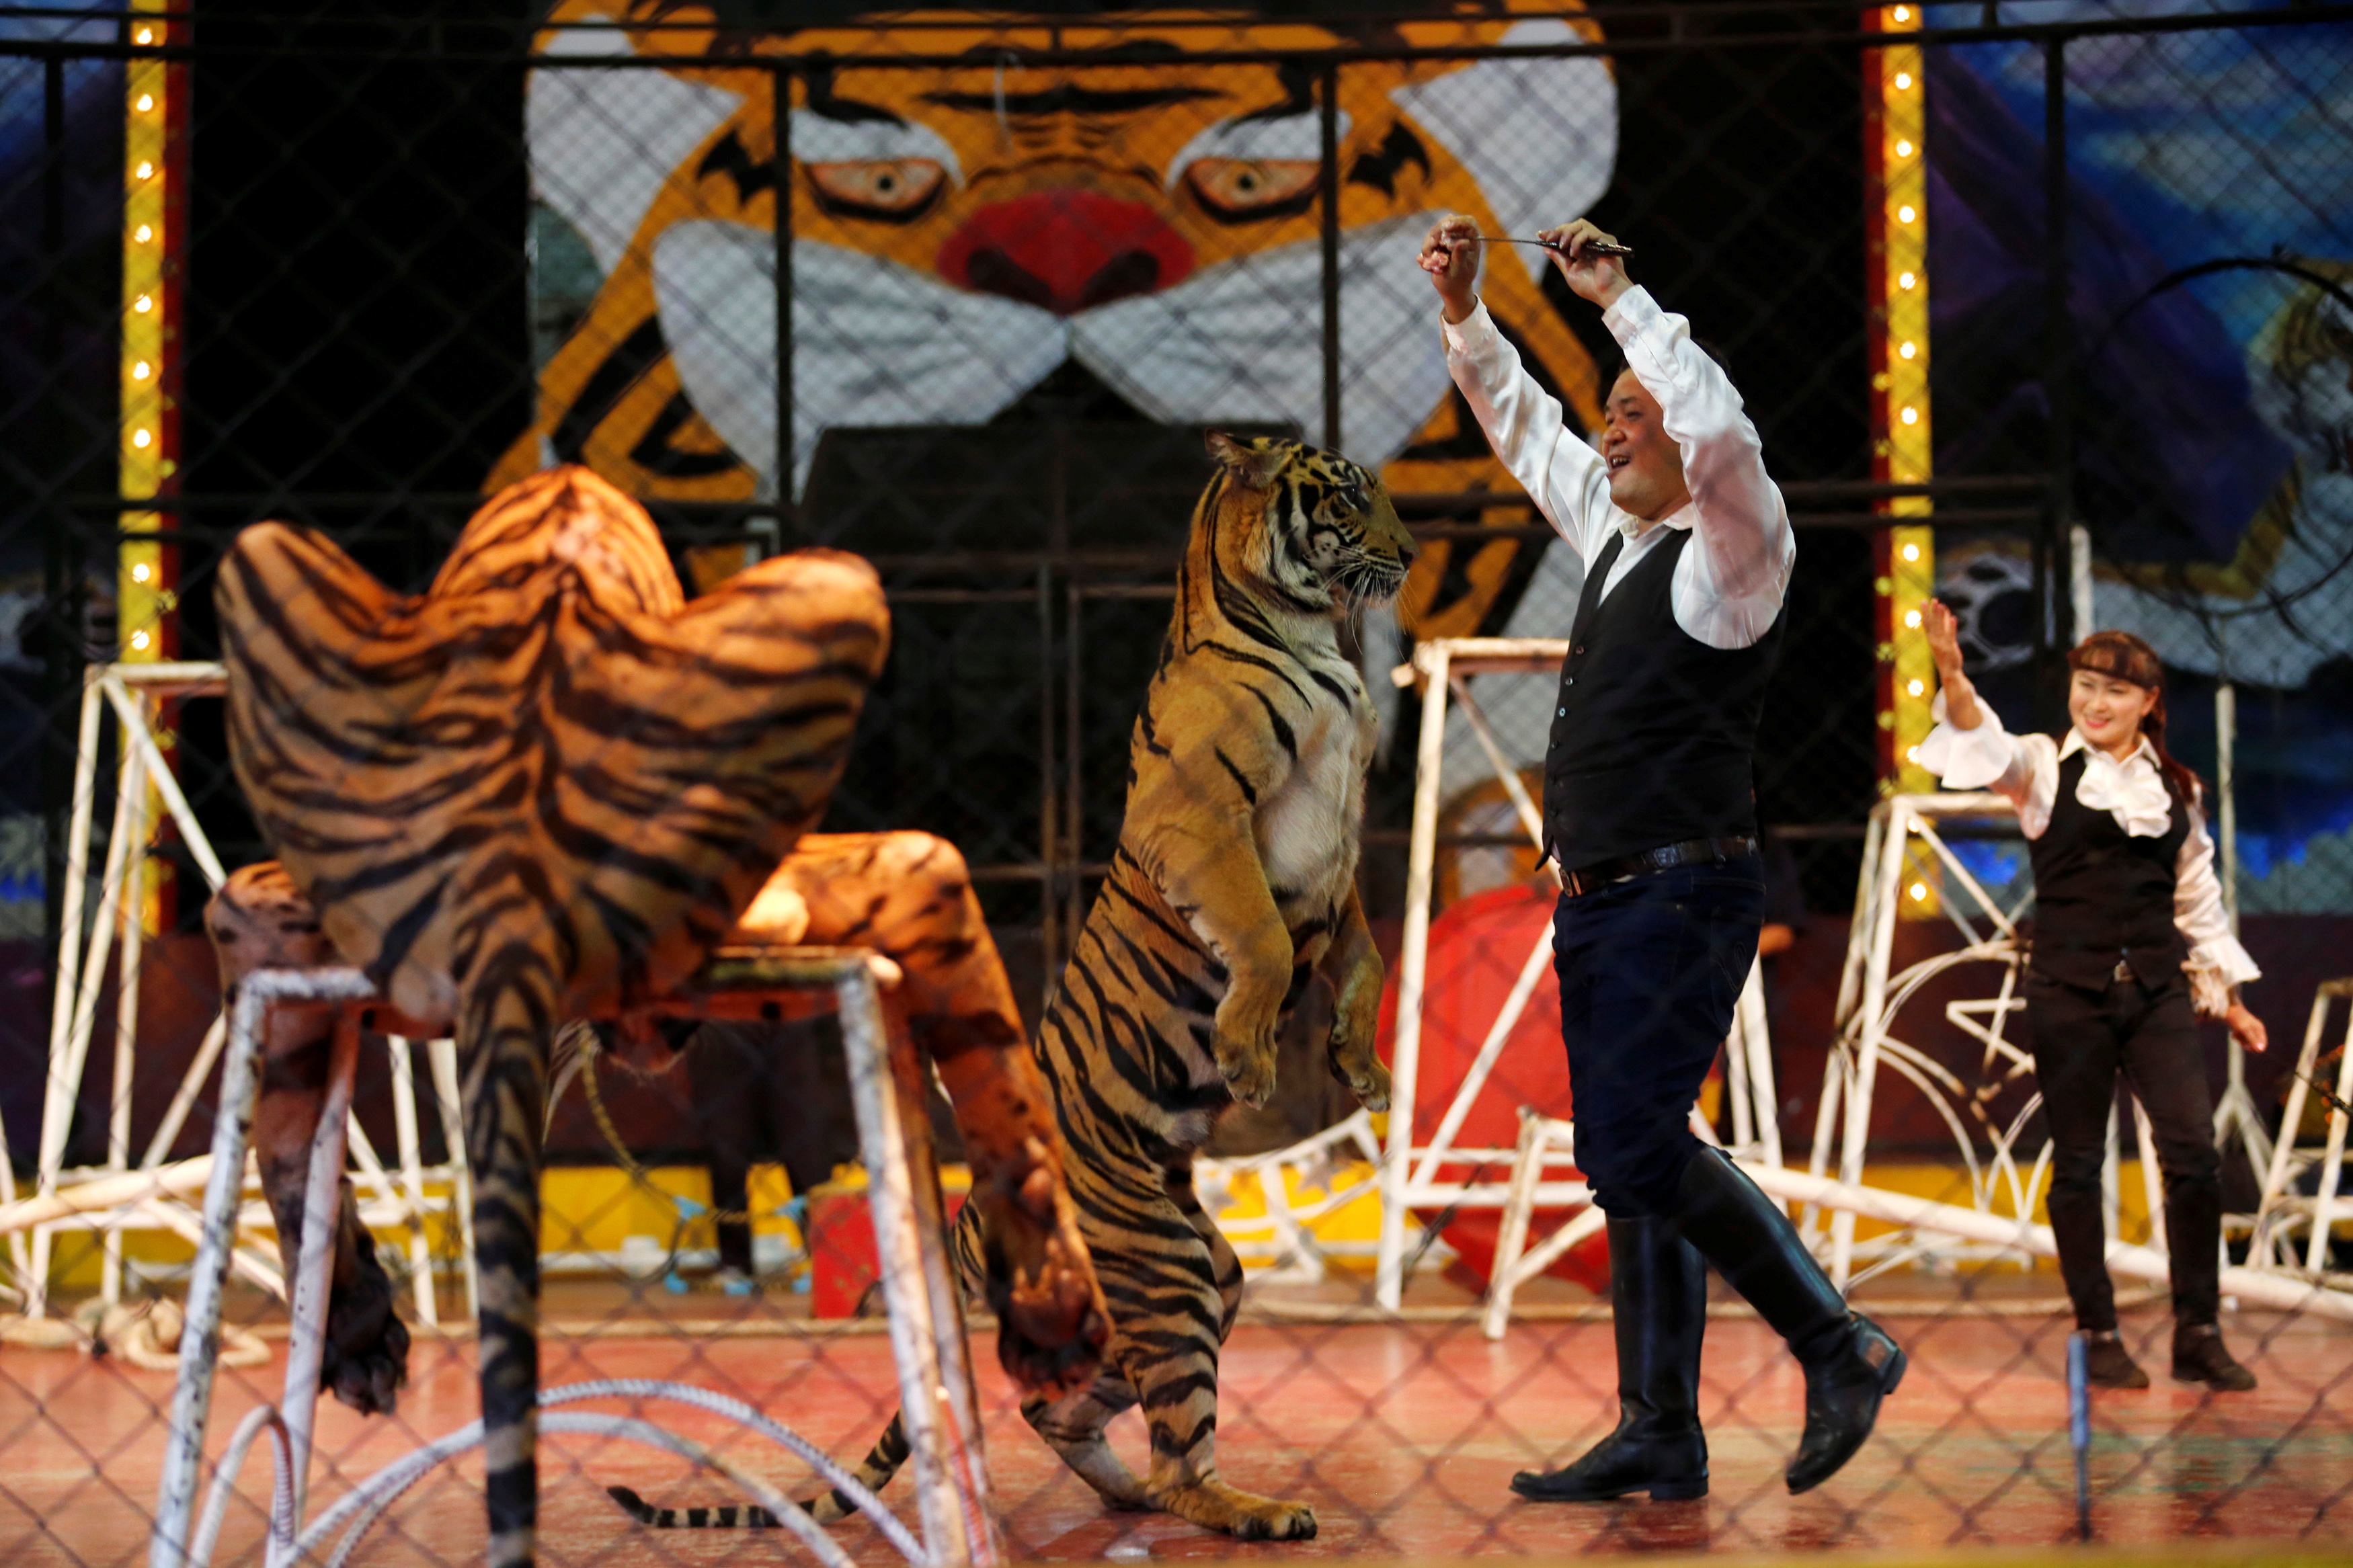 A trainer plays with a tiger during a performance for tourists at Sriracha Tiger Zoo, in Chonburi province, Thailand, on June 7, 2016 (Chaiwat Subprasom—Reuters)